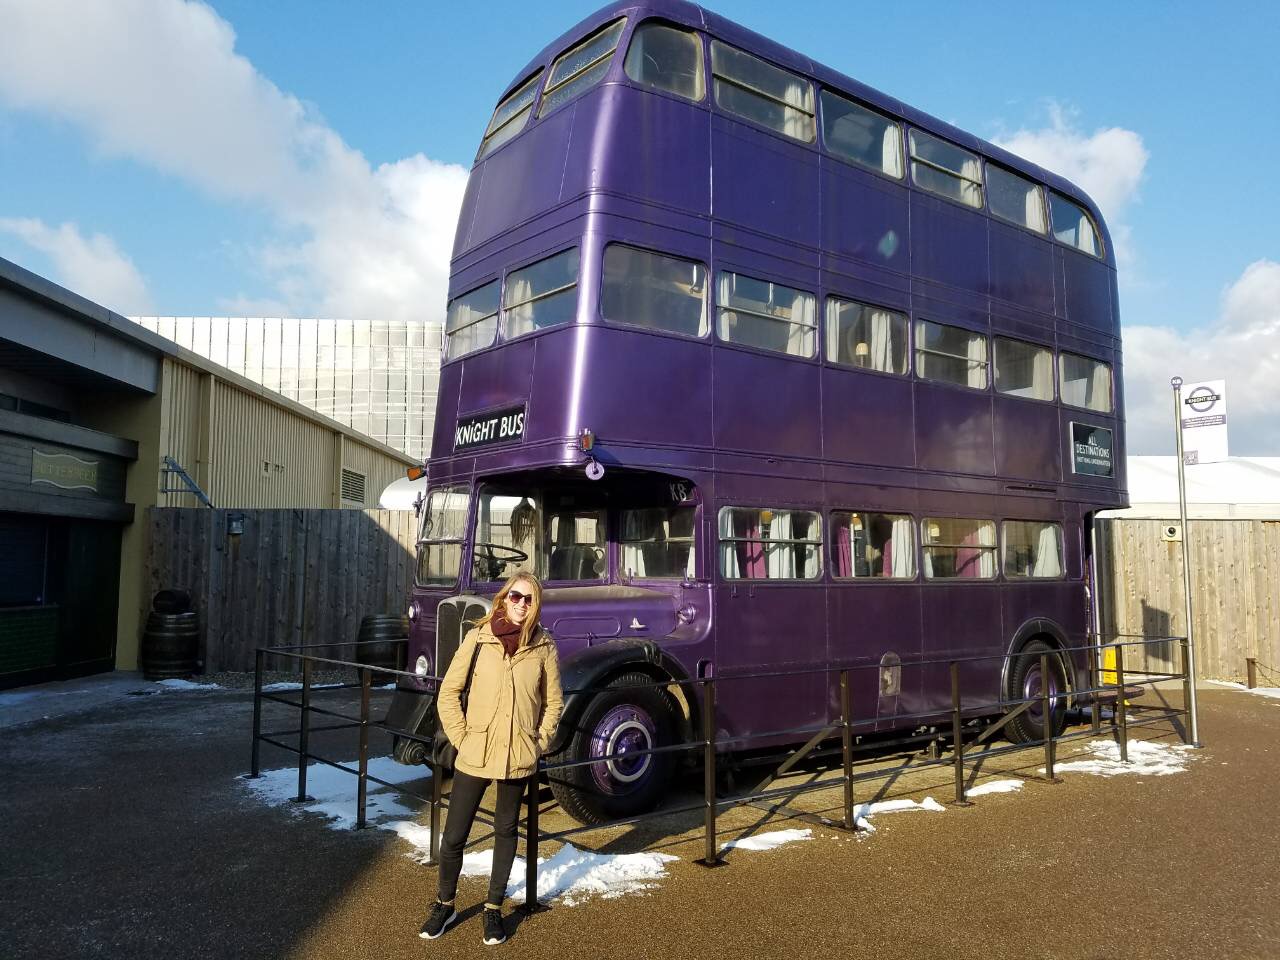 Knight Bus at the Harry Potter Studio Tour